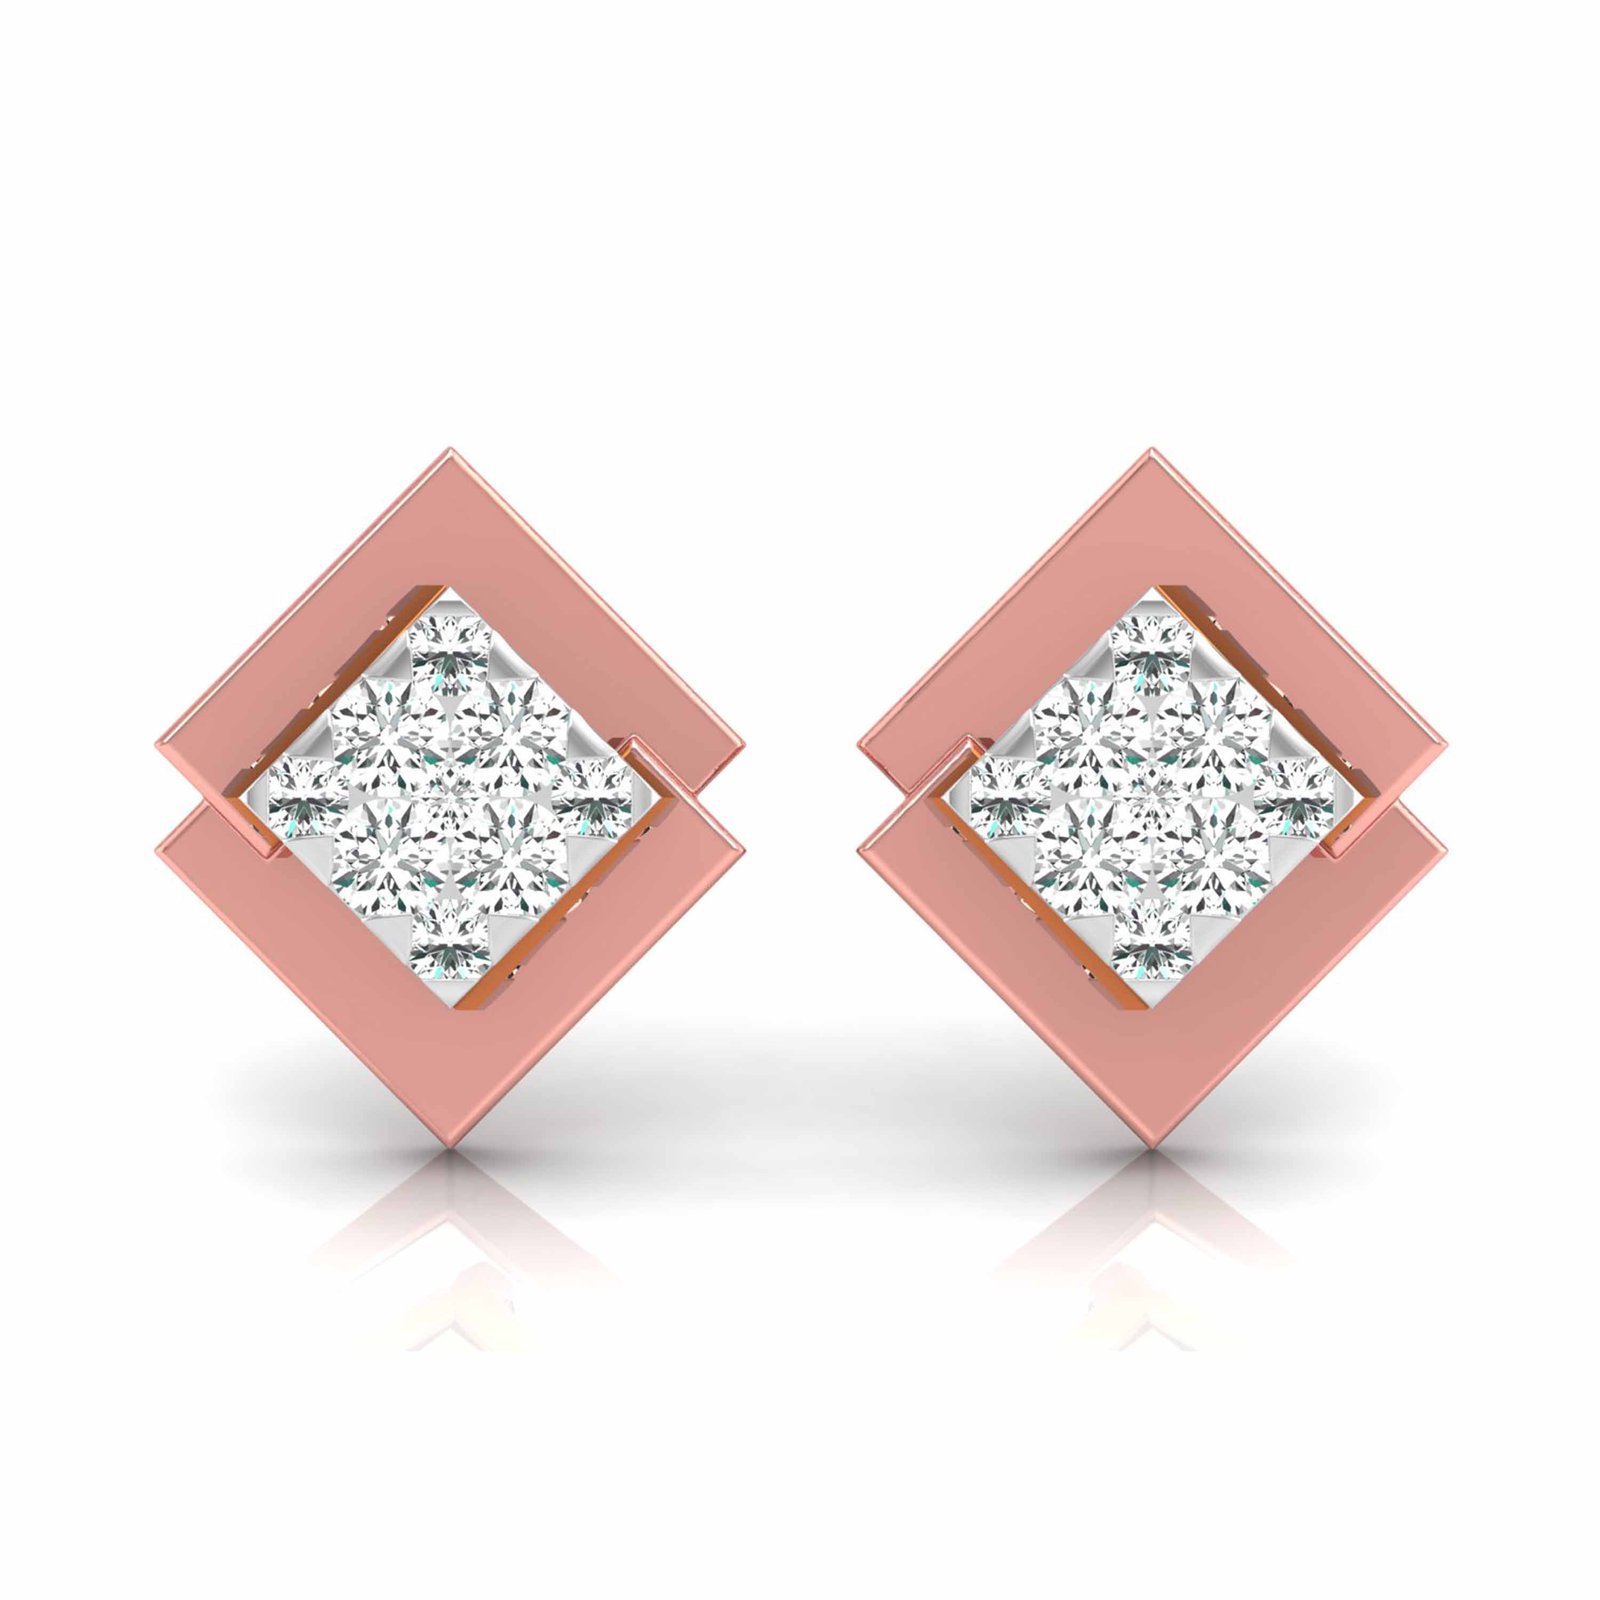 Sharp Square Diamond Earring In Pure Gold By Dhanji Jewels